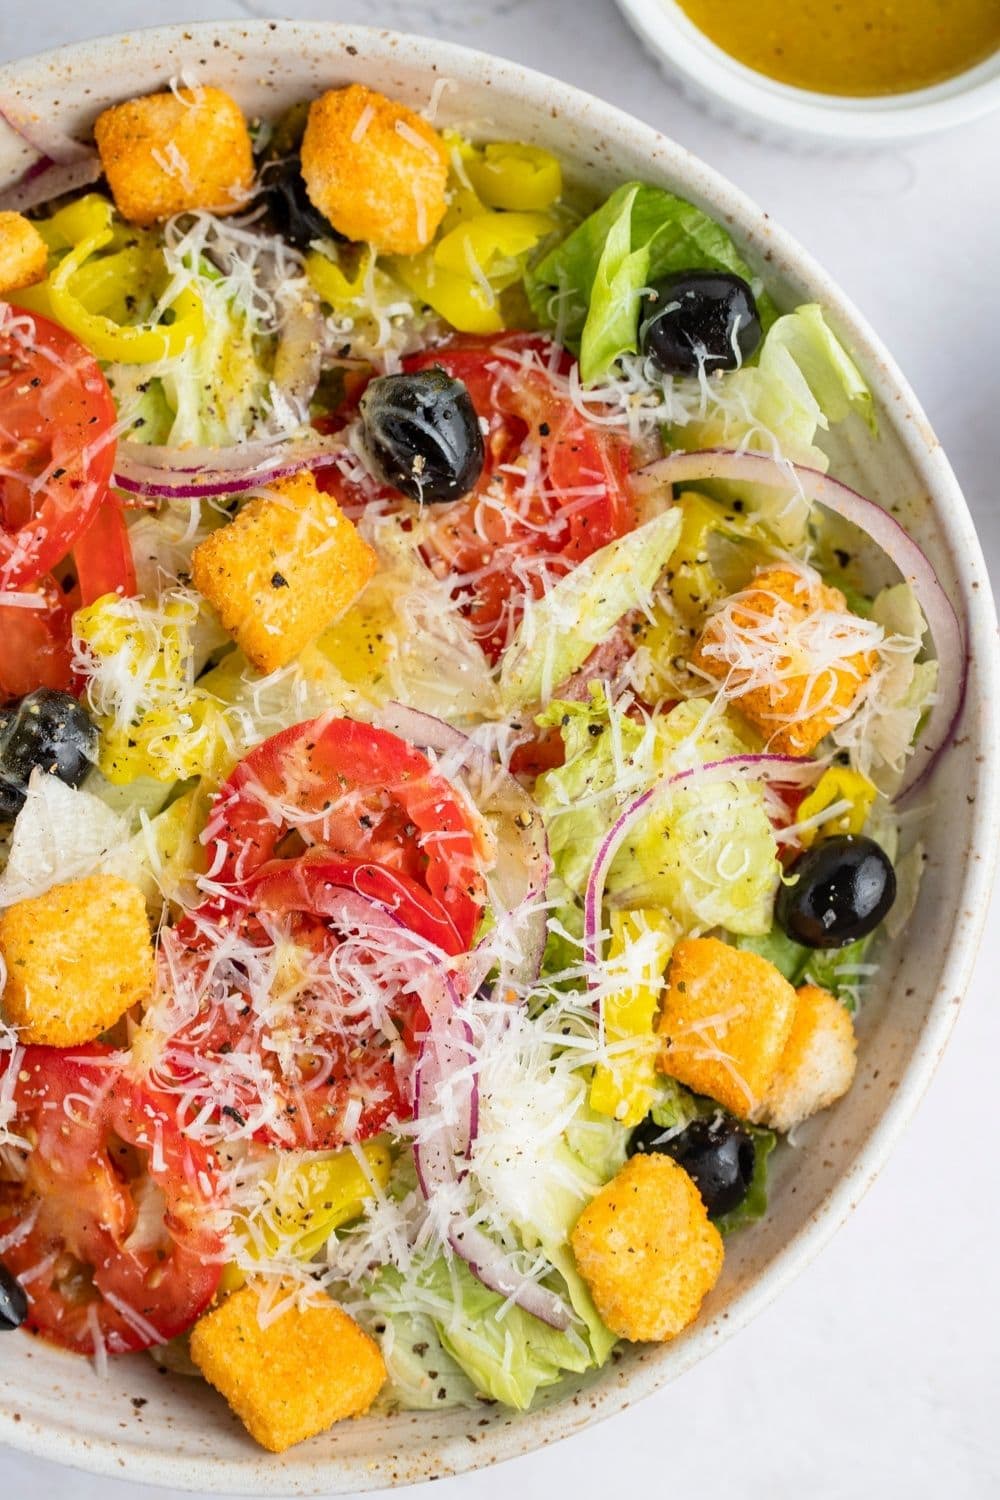 Olive Garden Salad with Lettuce, Tomatoes and Black Olives